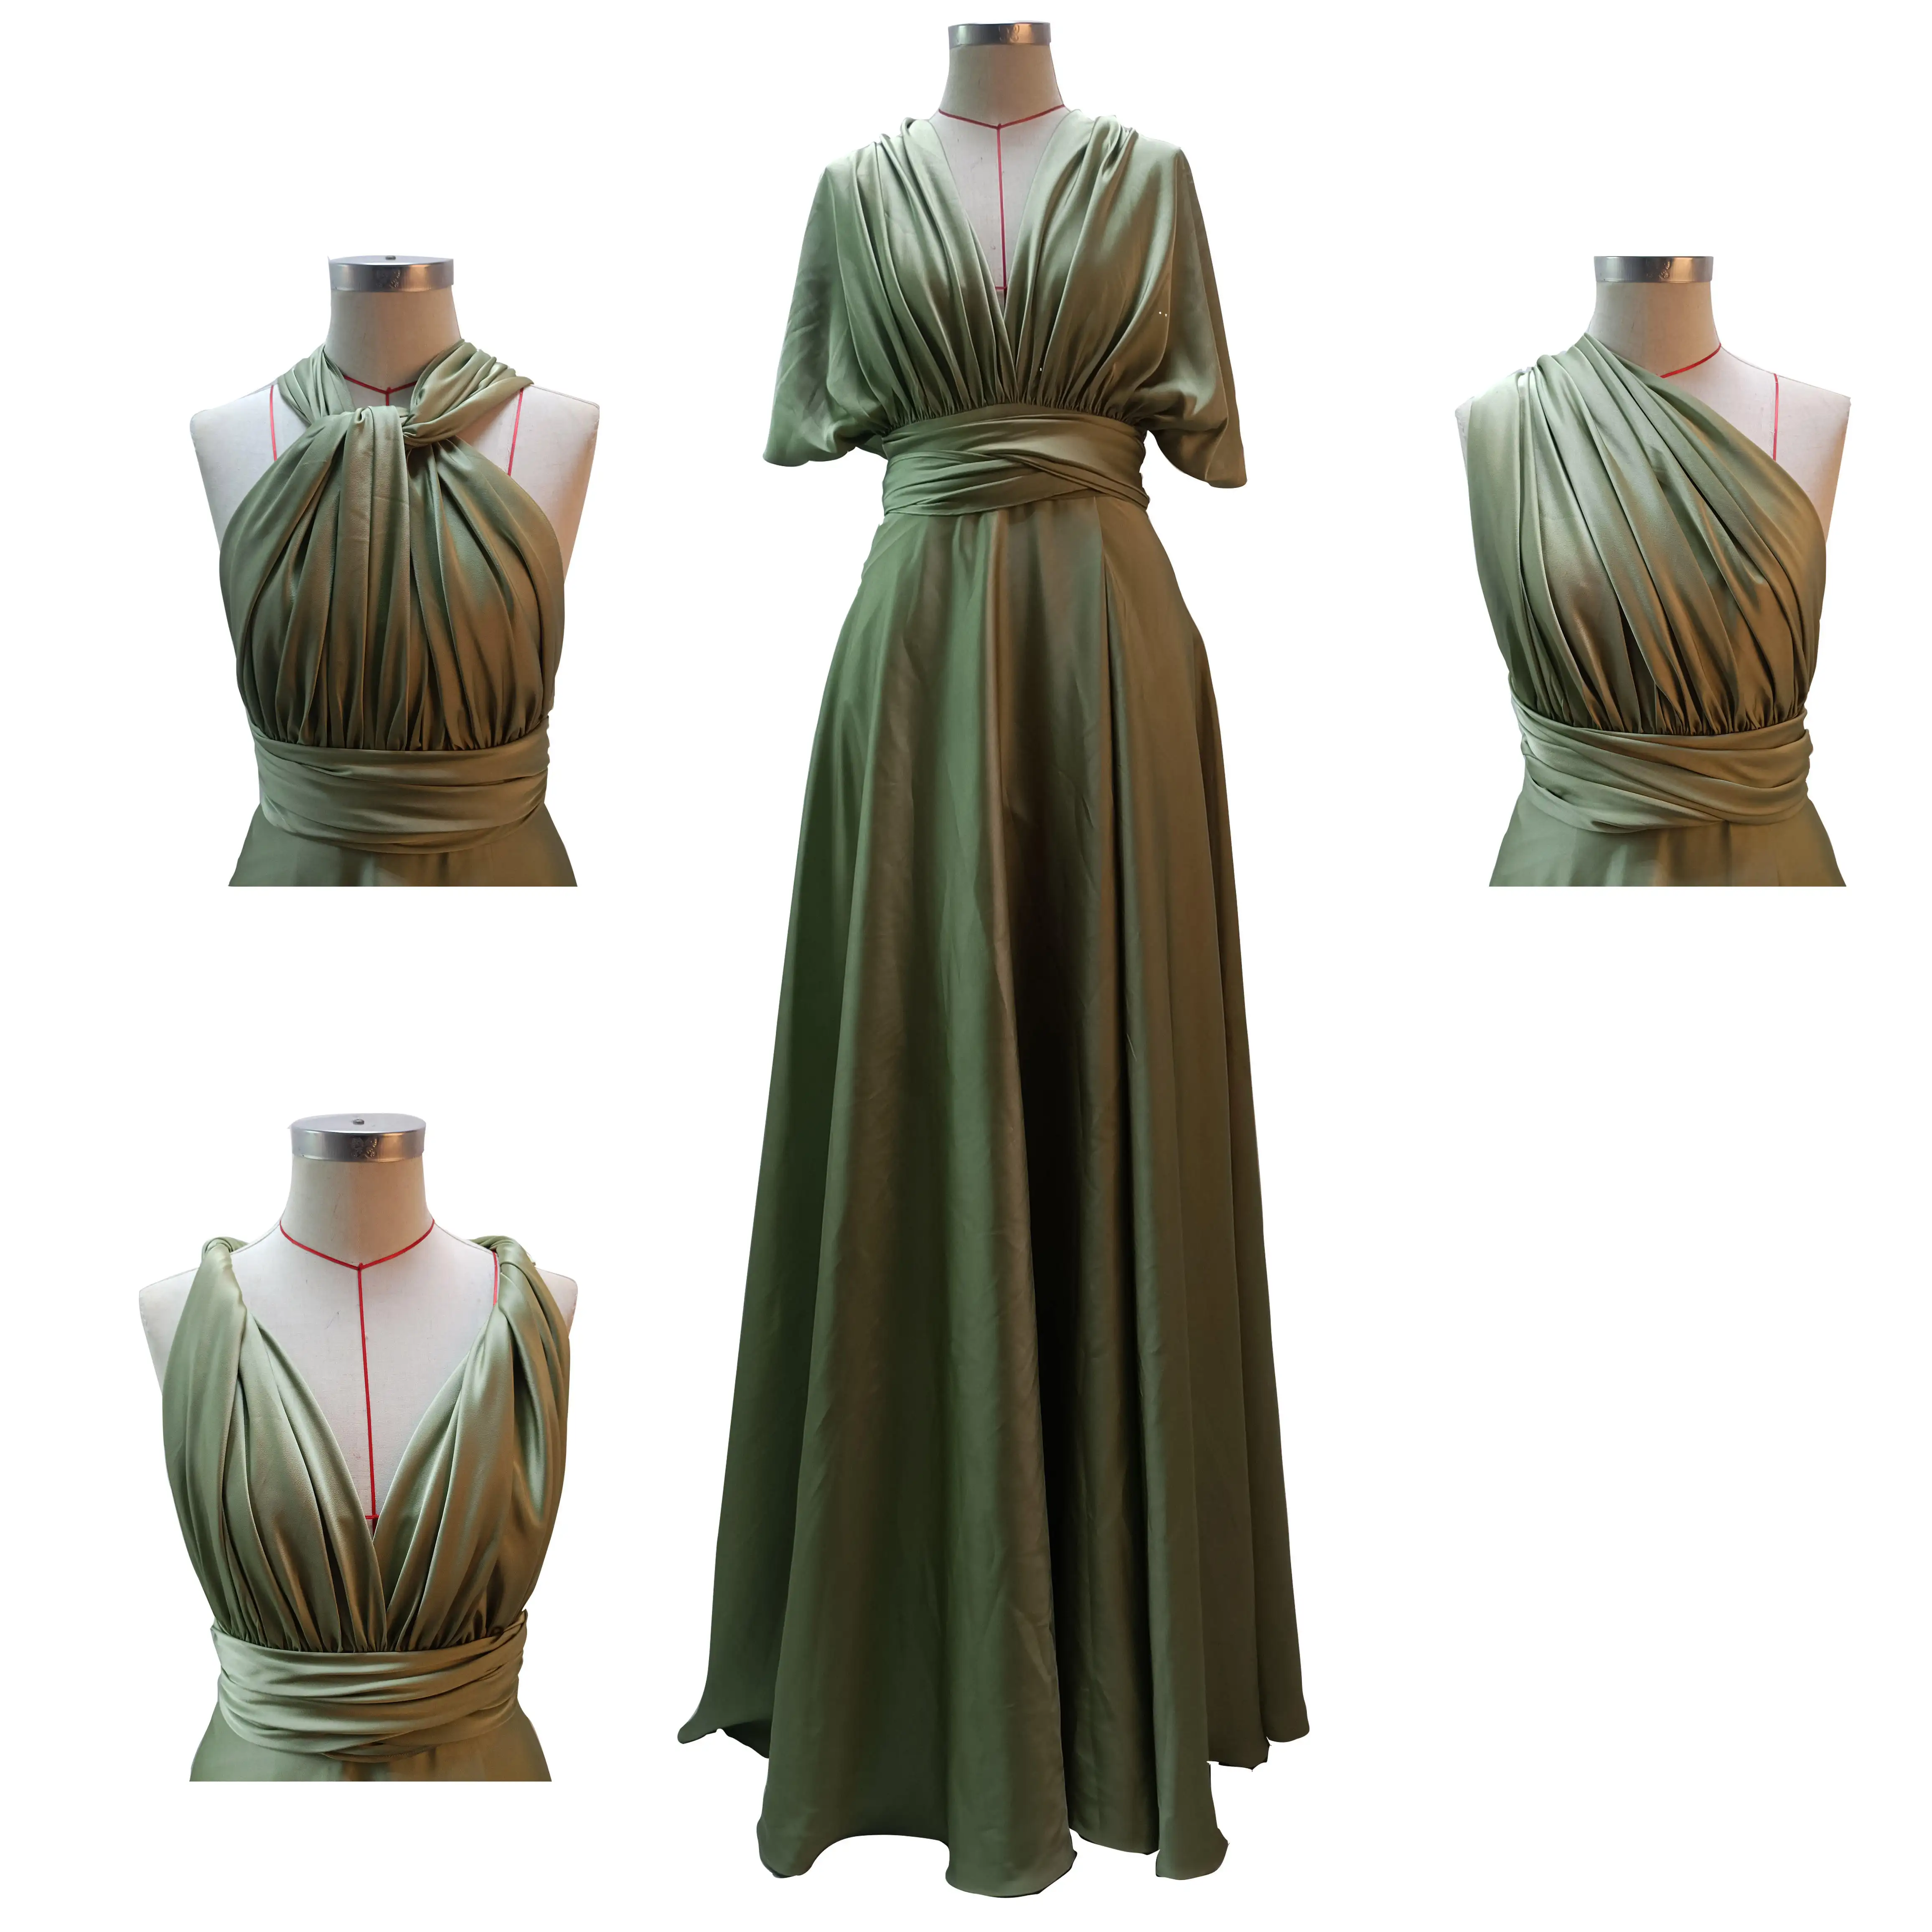 Tenmail New Arrival Infinity Evening Gown Green Satin Floor Length Multiway Convertible Birthday Party Evening Dress